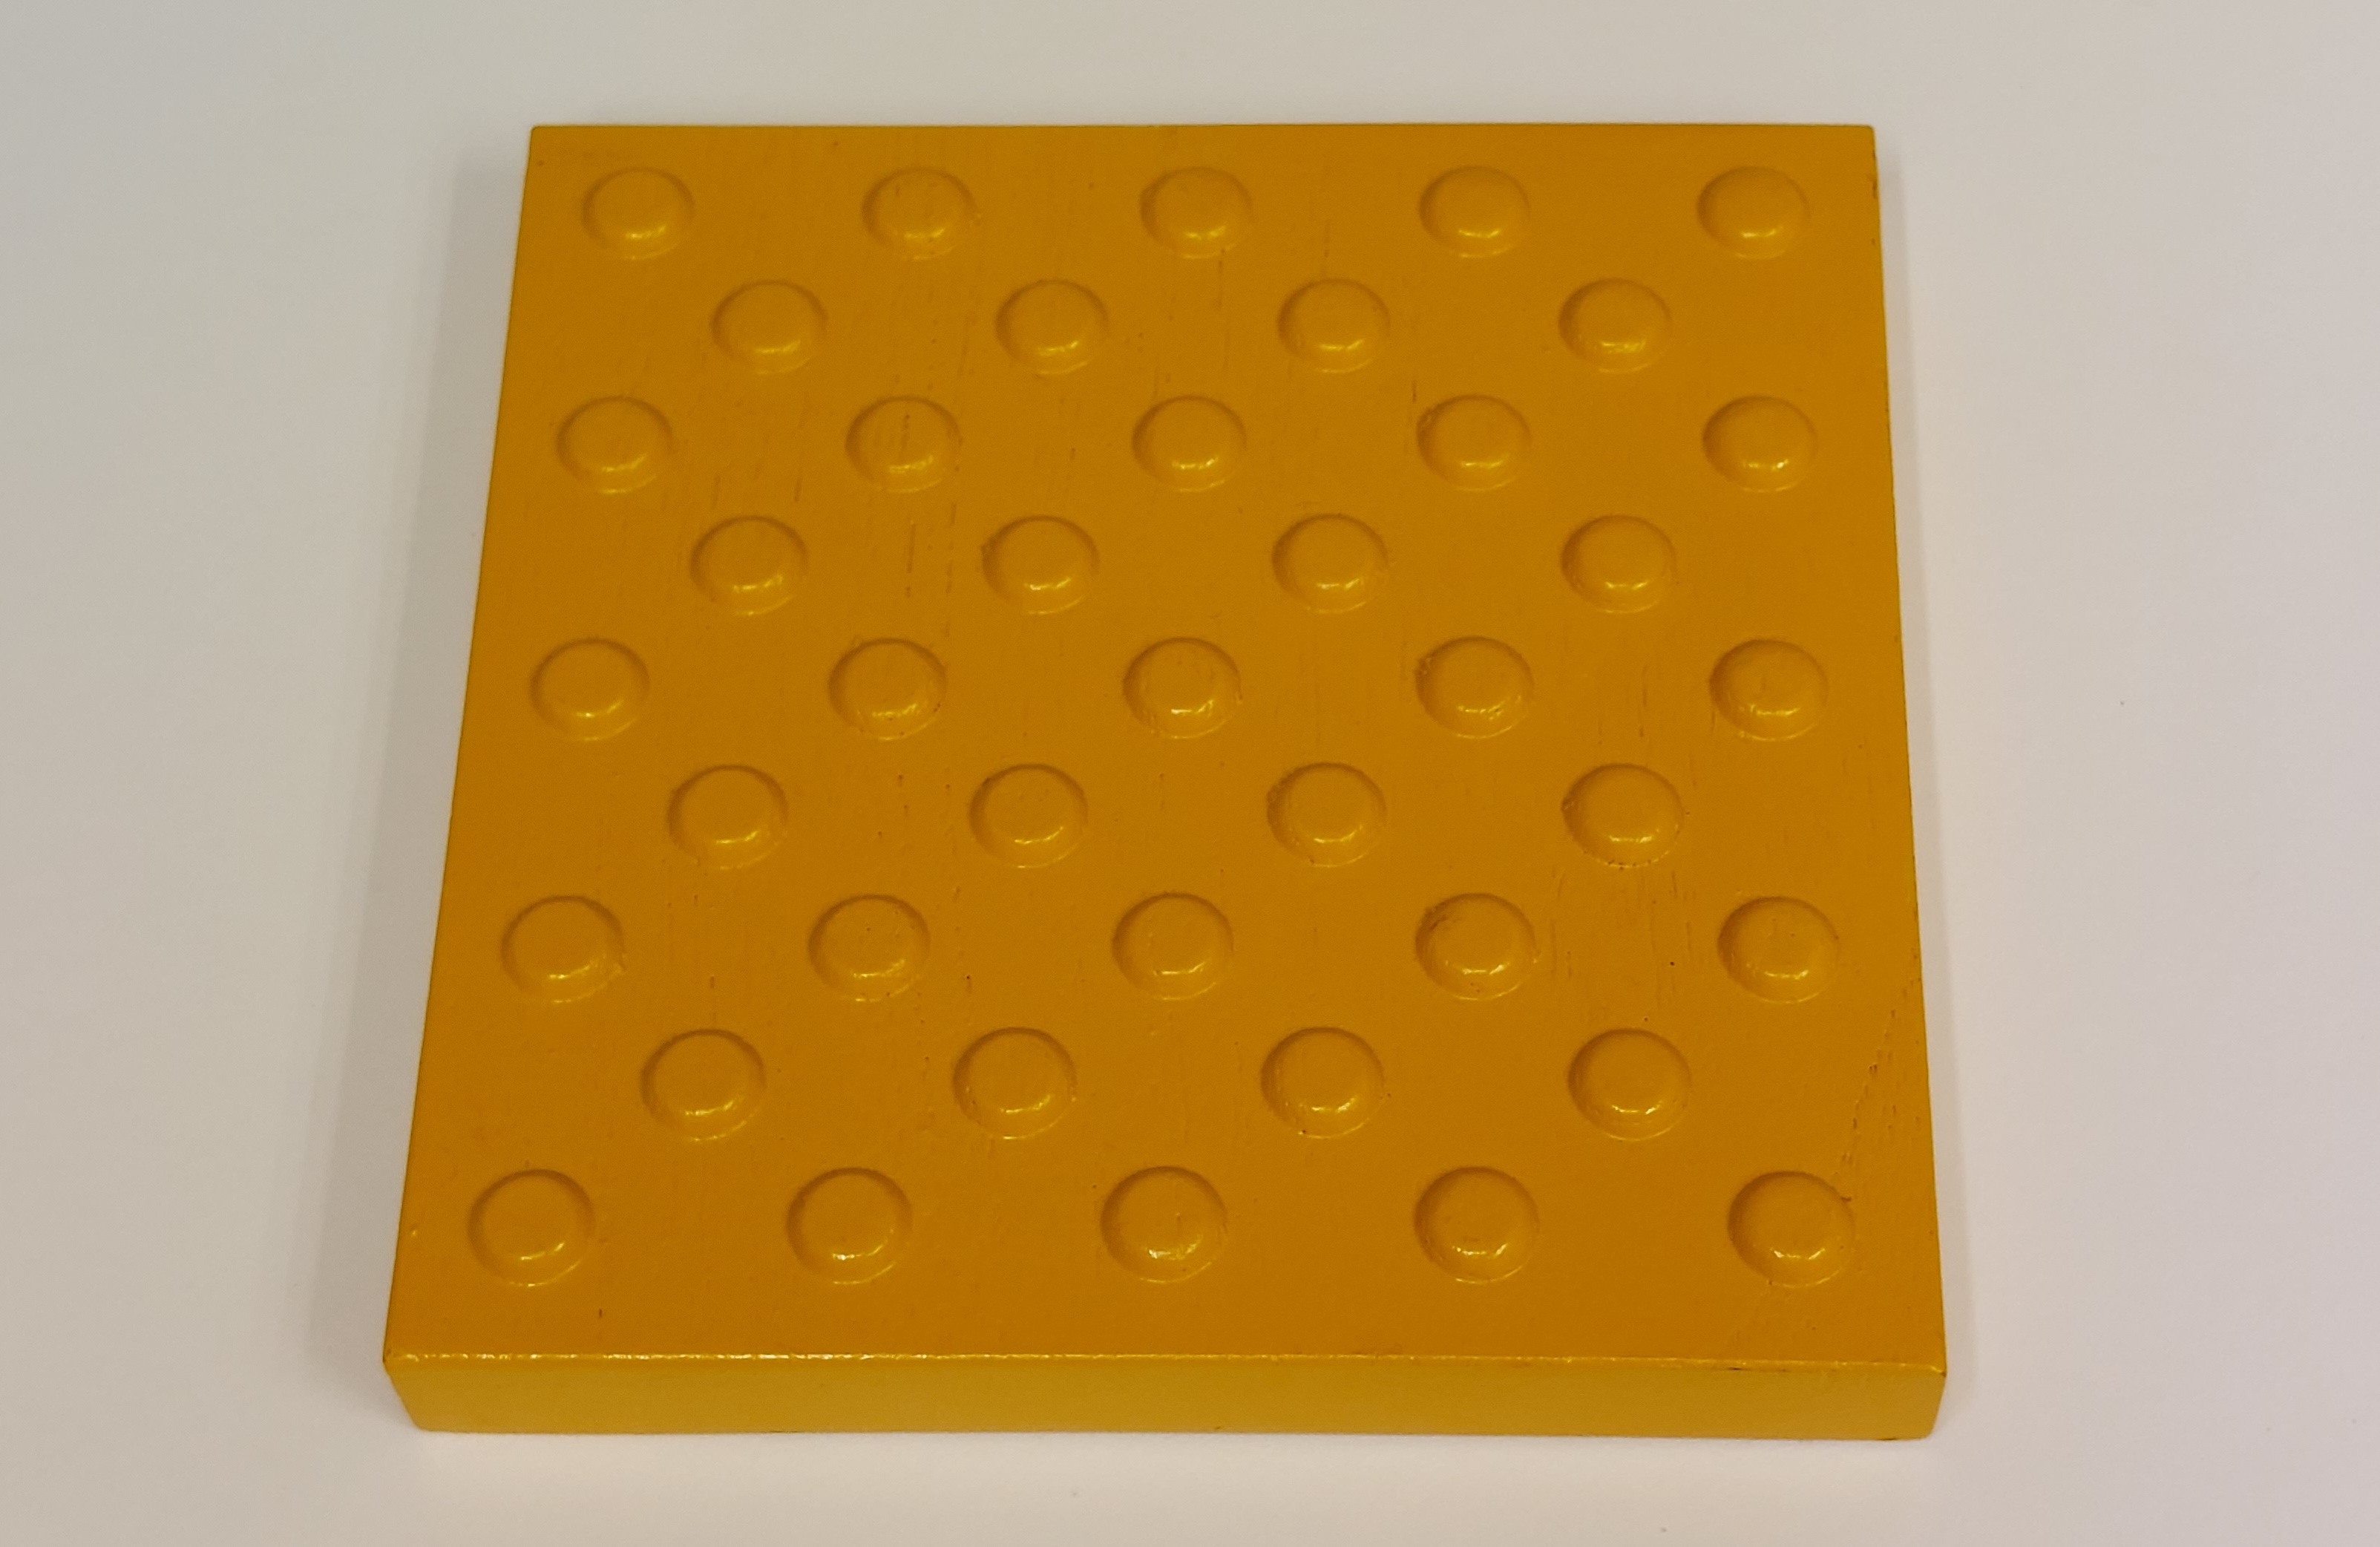 A model of tactile block made by persons in custody.